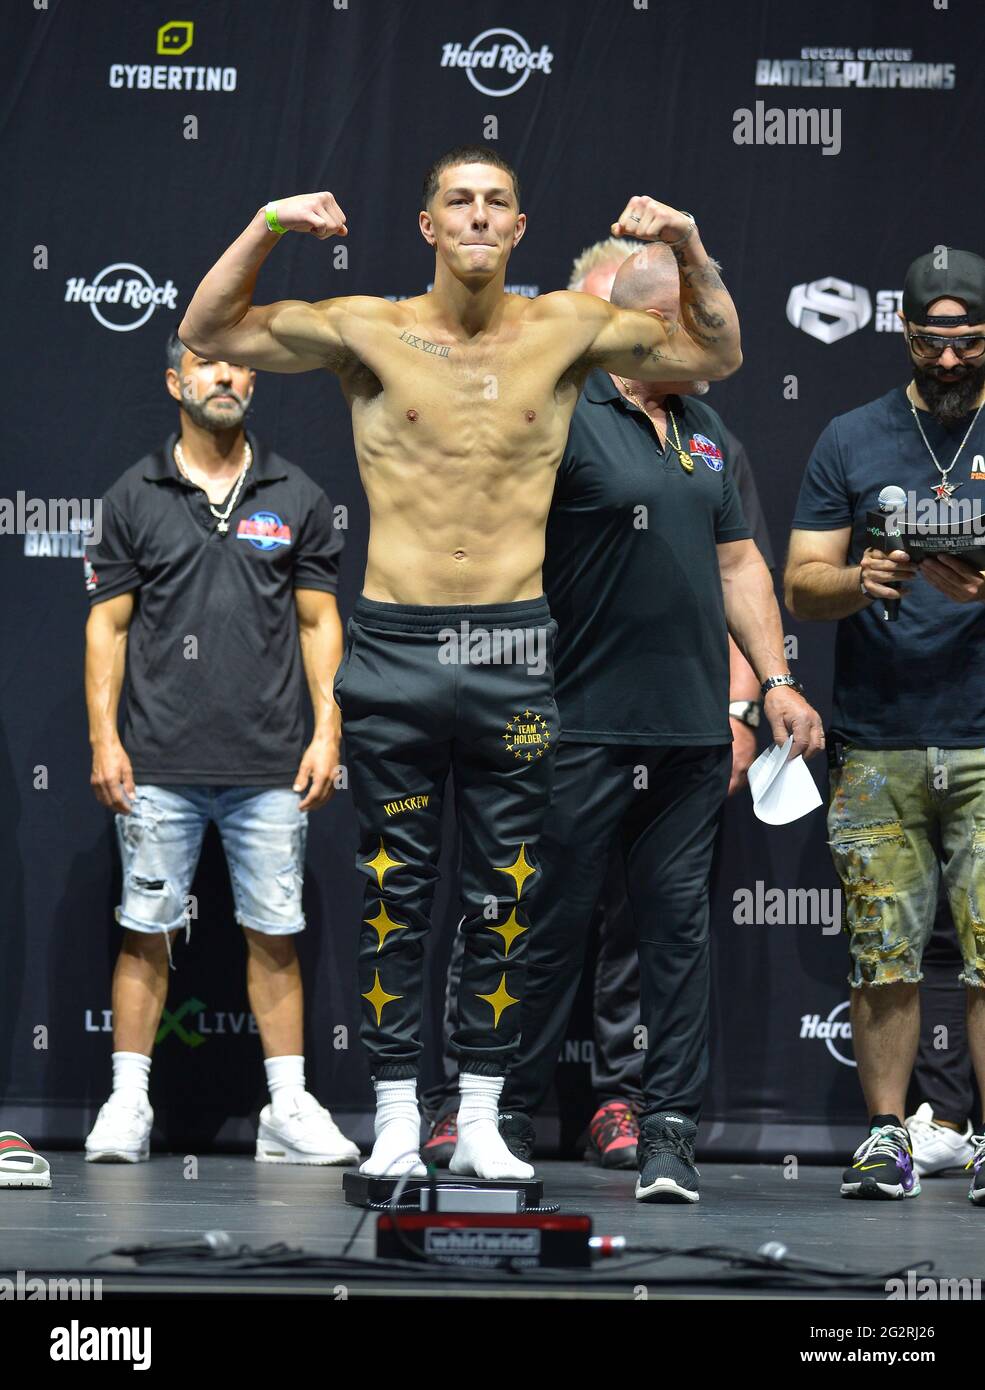 Hollywood, Florida, USA. 11th June, 2021. TikTok personality Bryce Hall (L) poses on scale during the LiveXLive's Social Gloves: Battle Of The Platforms Pre-Fight Weigh-In at Hard Rock Live! in the Seminole Hard Rock Hotel & Casino on June 11, 2021 in Hollywood, Florida. Credit: Mpi10/Media Punch/Alamy Live News Stock Photo